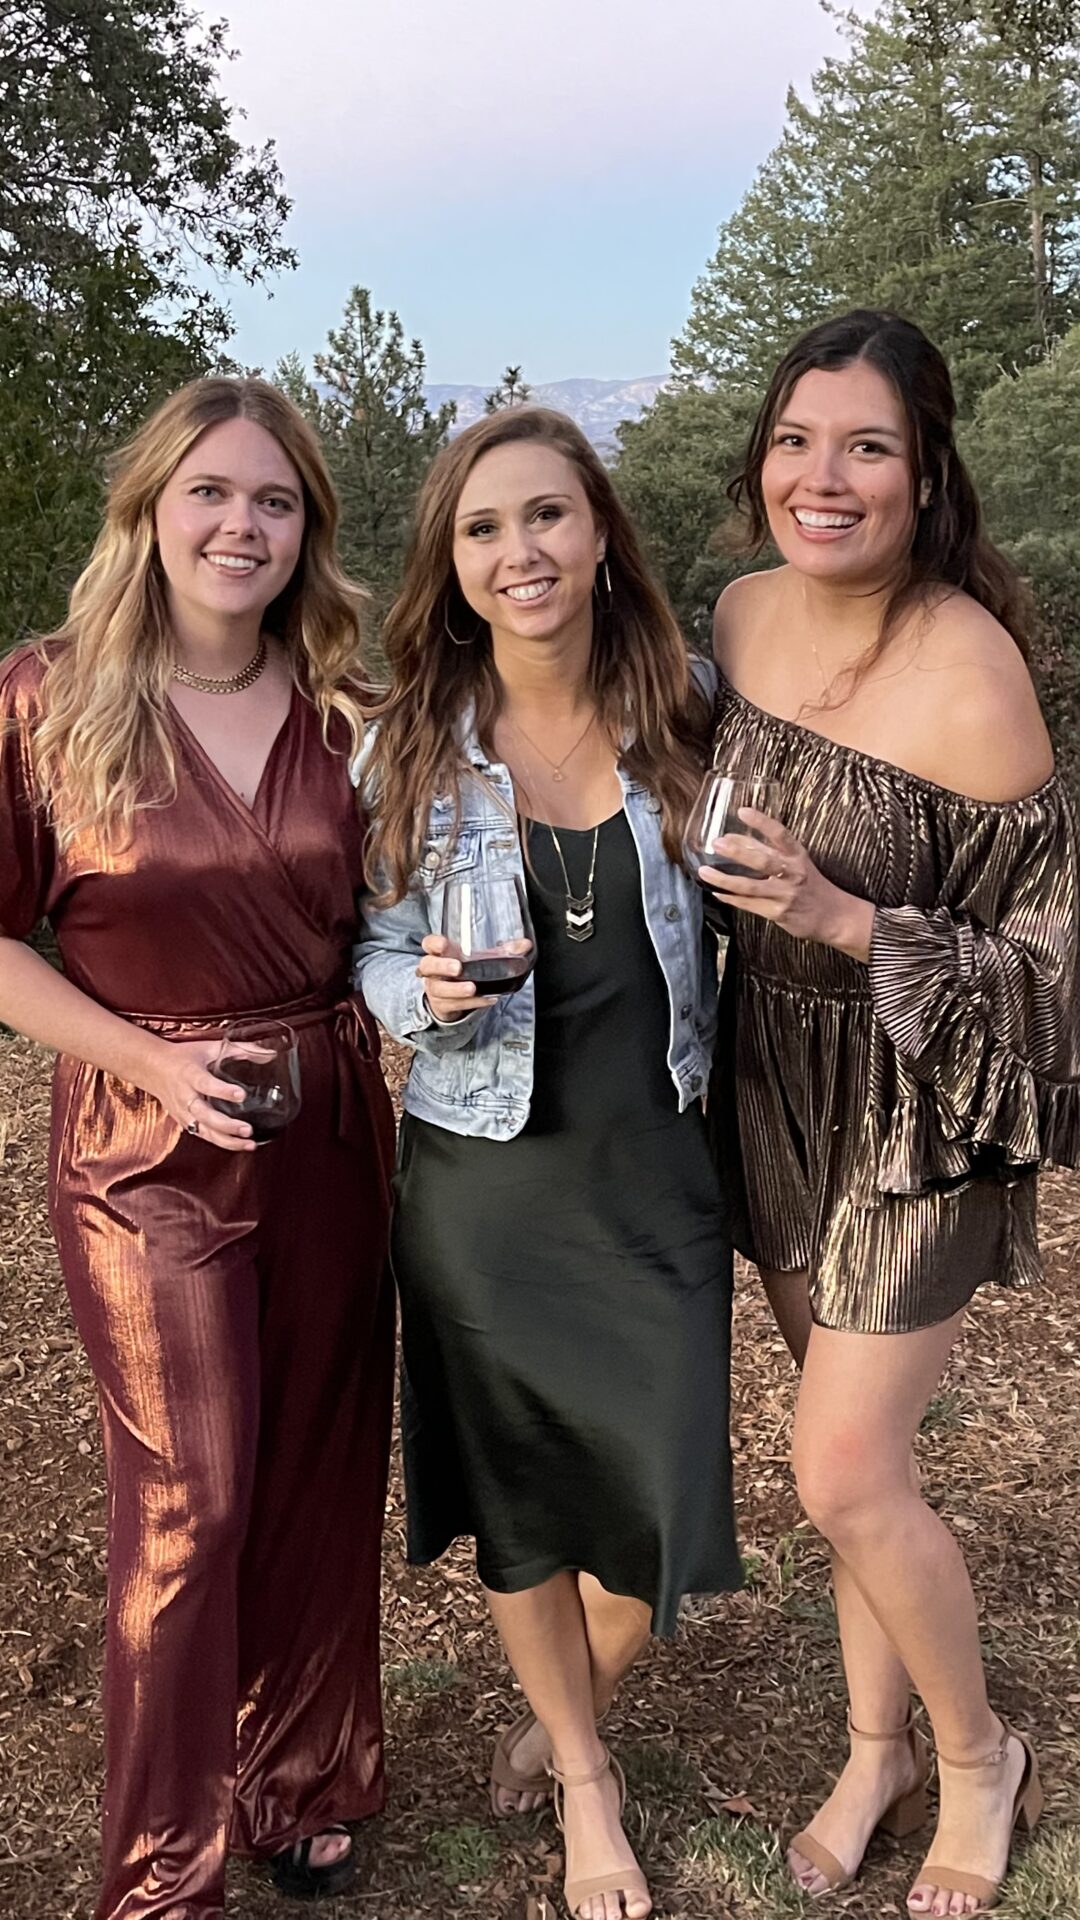 Paige and her friends enjoying wine in a vineyard